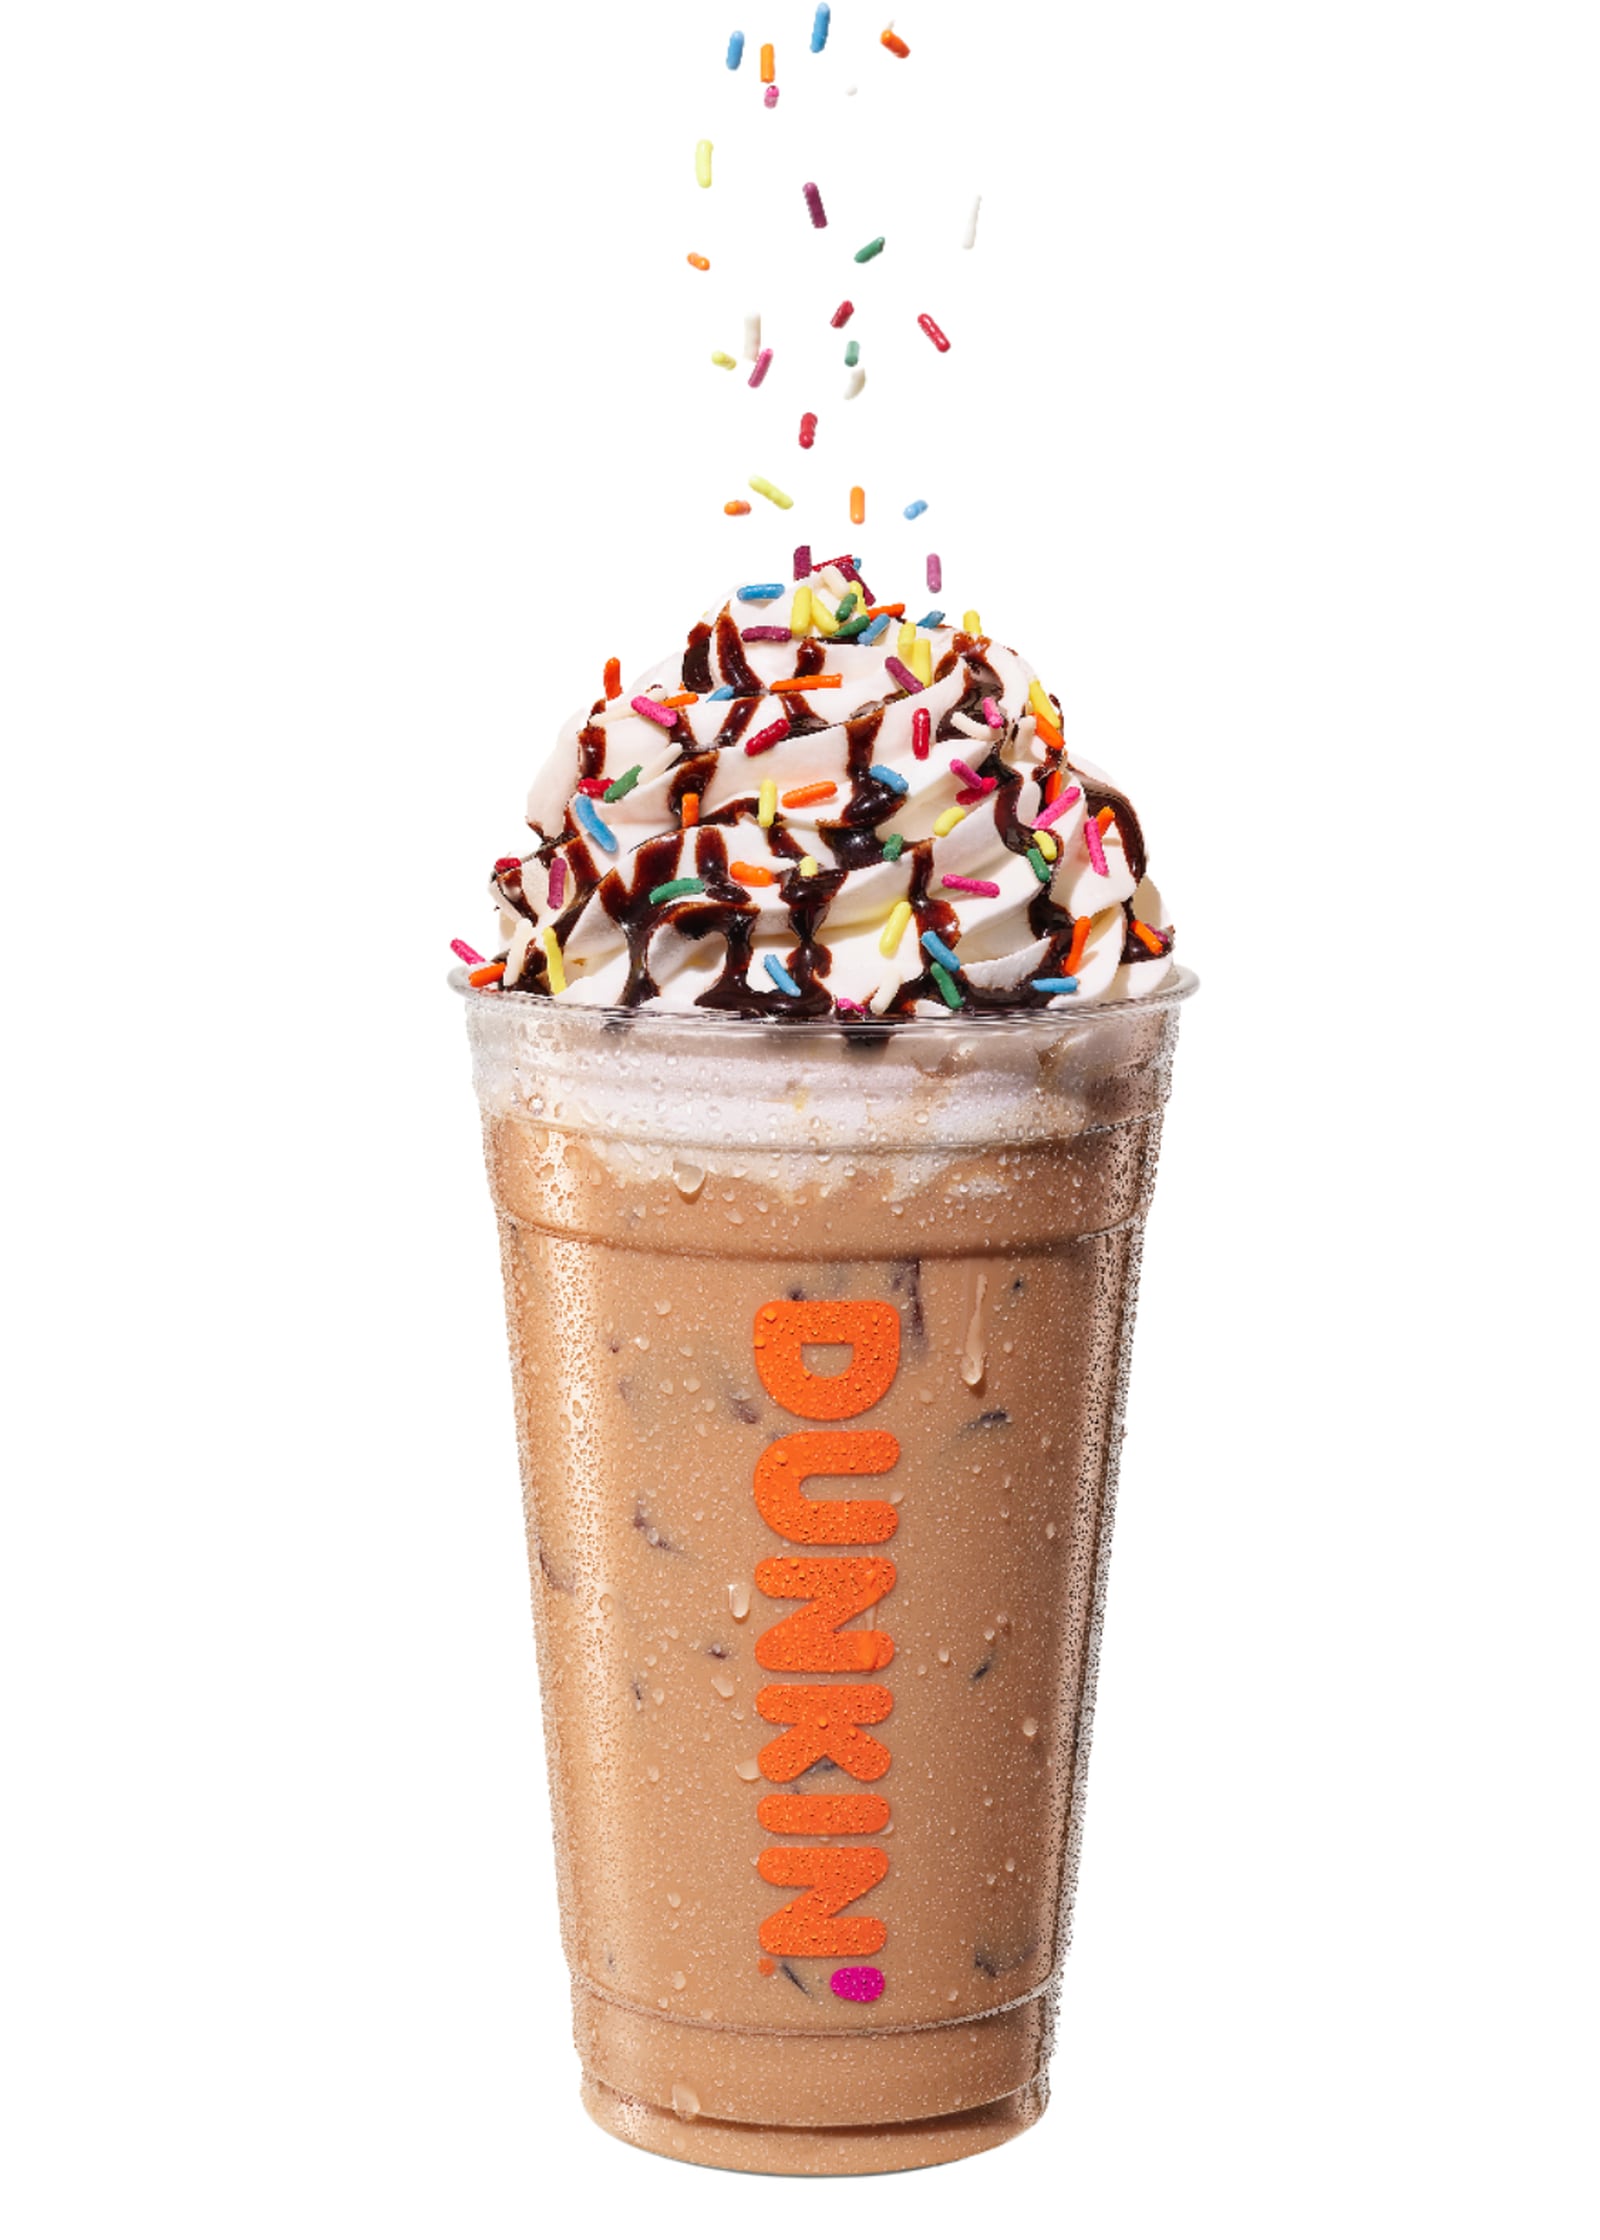 Dunkin’ debuts refreshing new drinks and savory new treats at Orlando locations WFTV